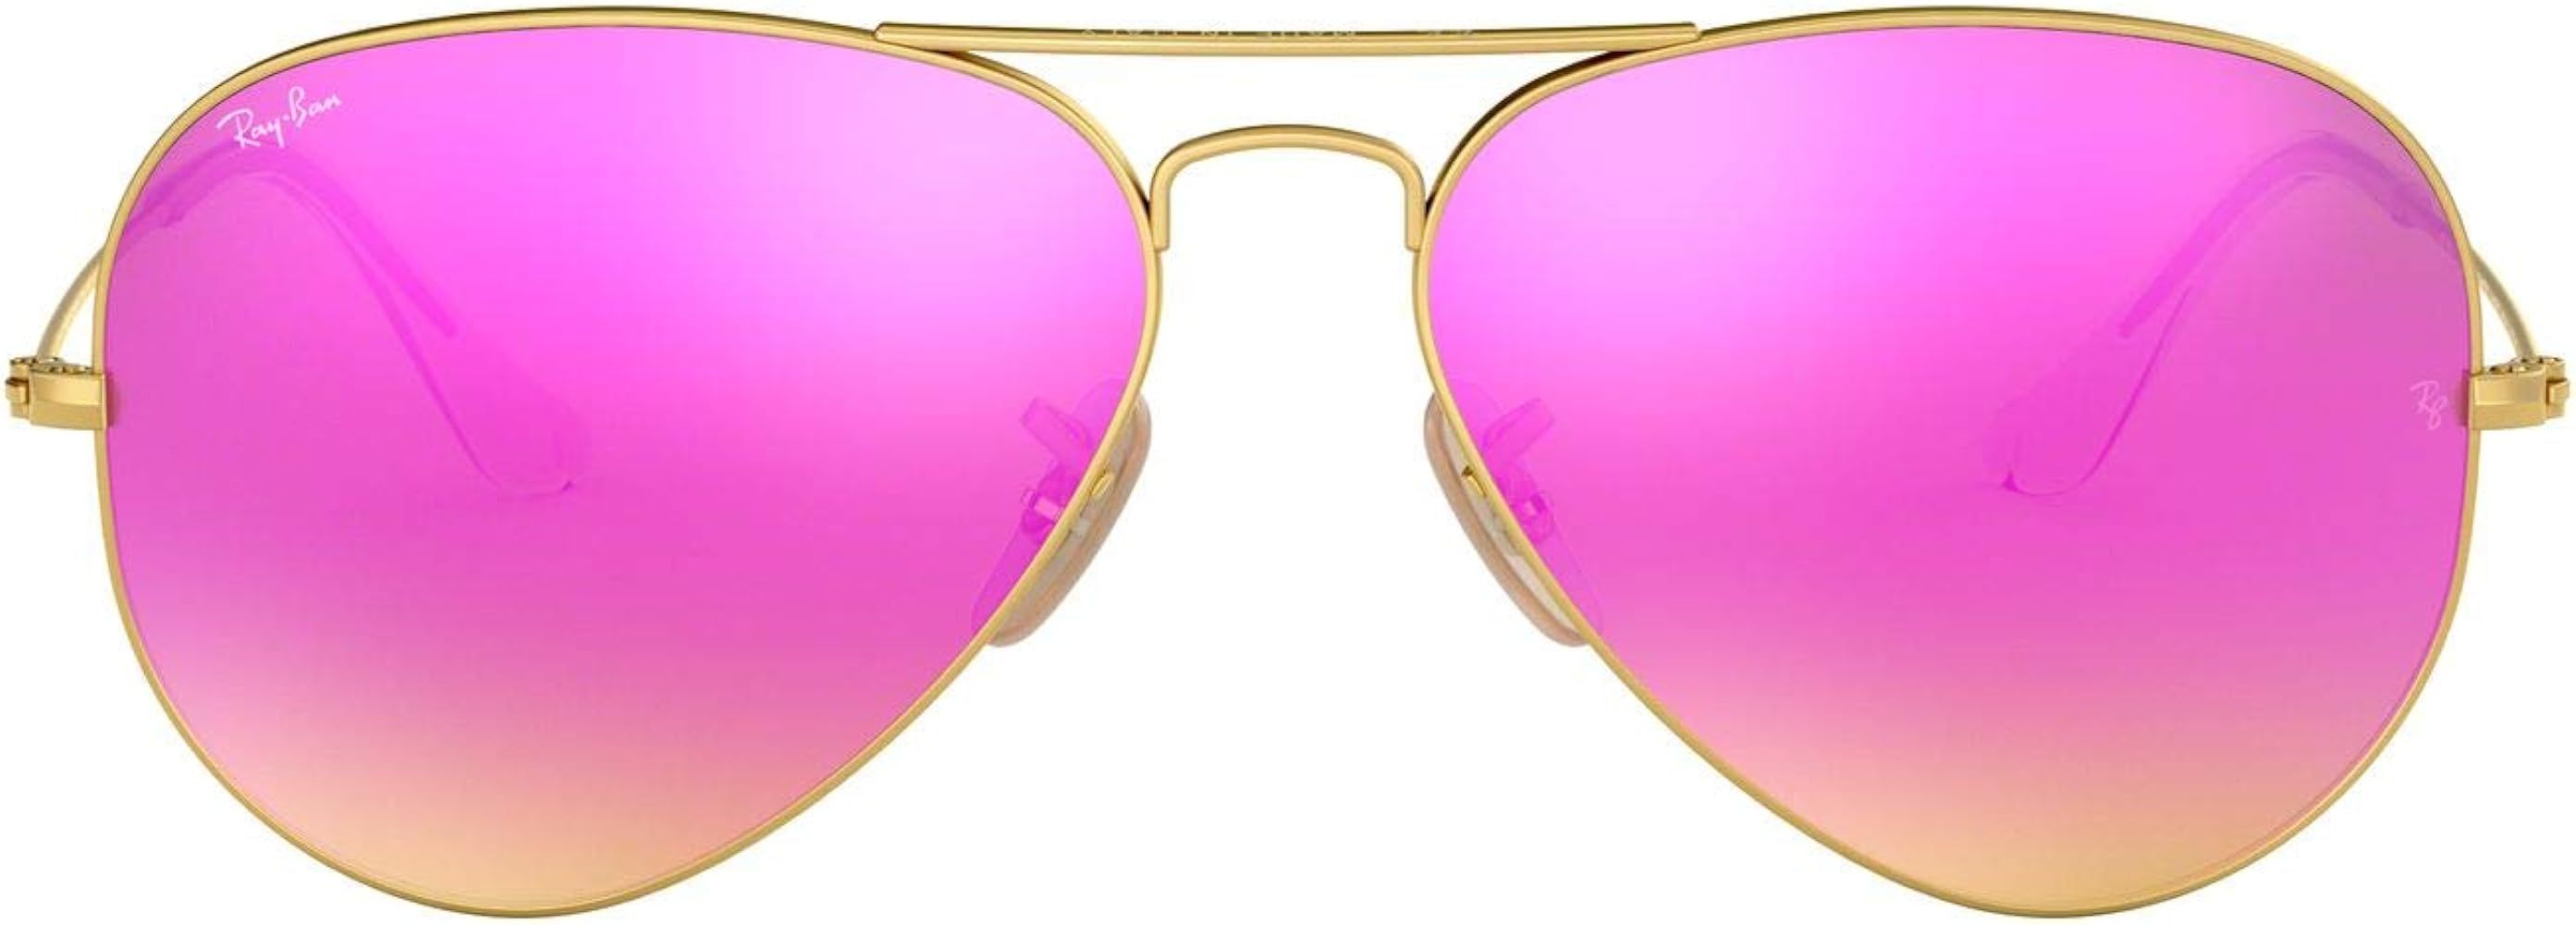 Ray-Ban RB3025 Aviator Large Metal Mirrored Unisex Sunglasses (Matte Gold Frame/Pink Mirror Lens 112 | Amazon (US)